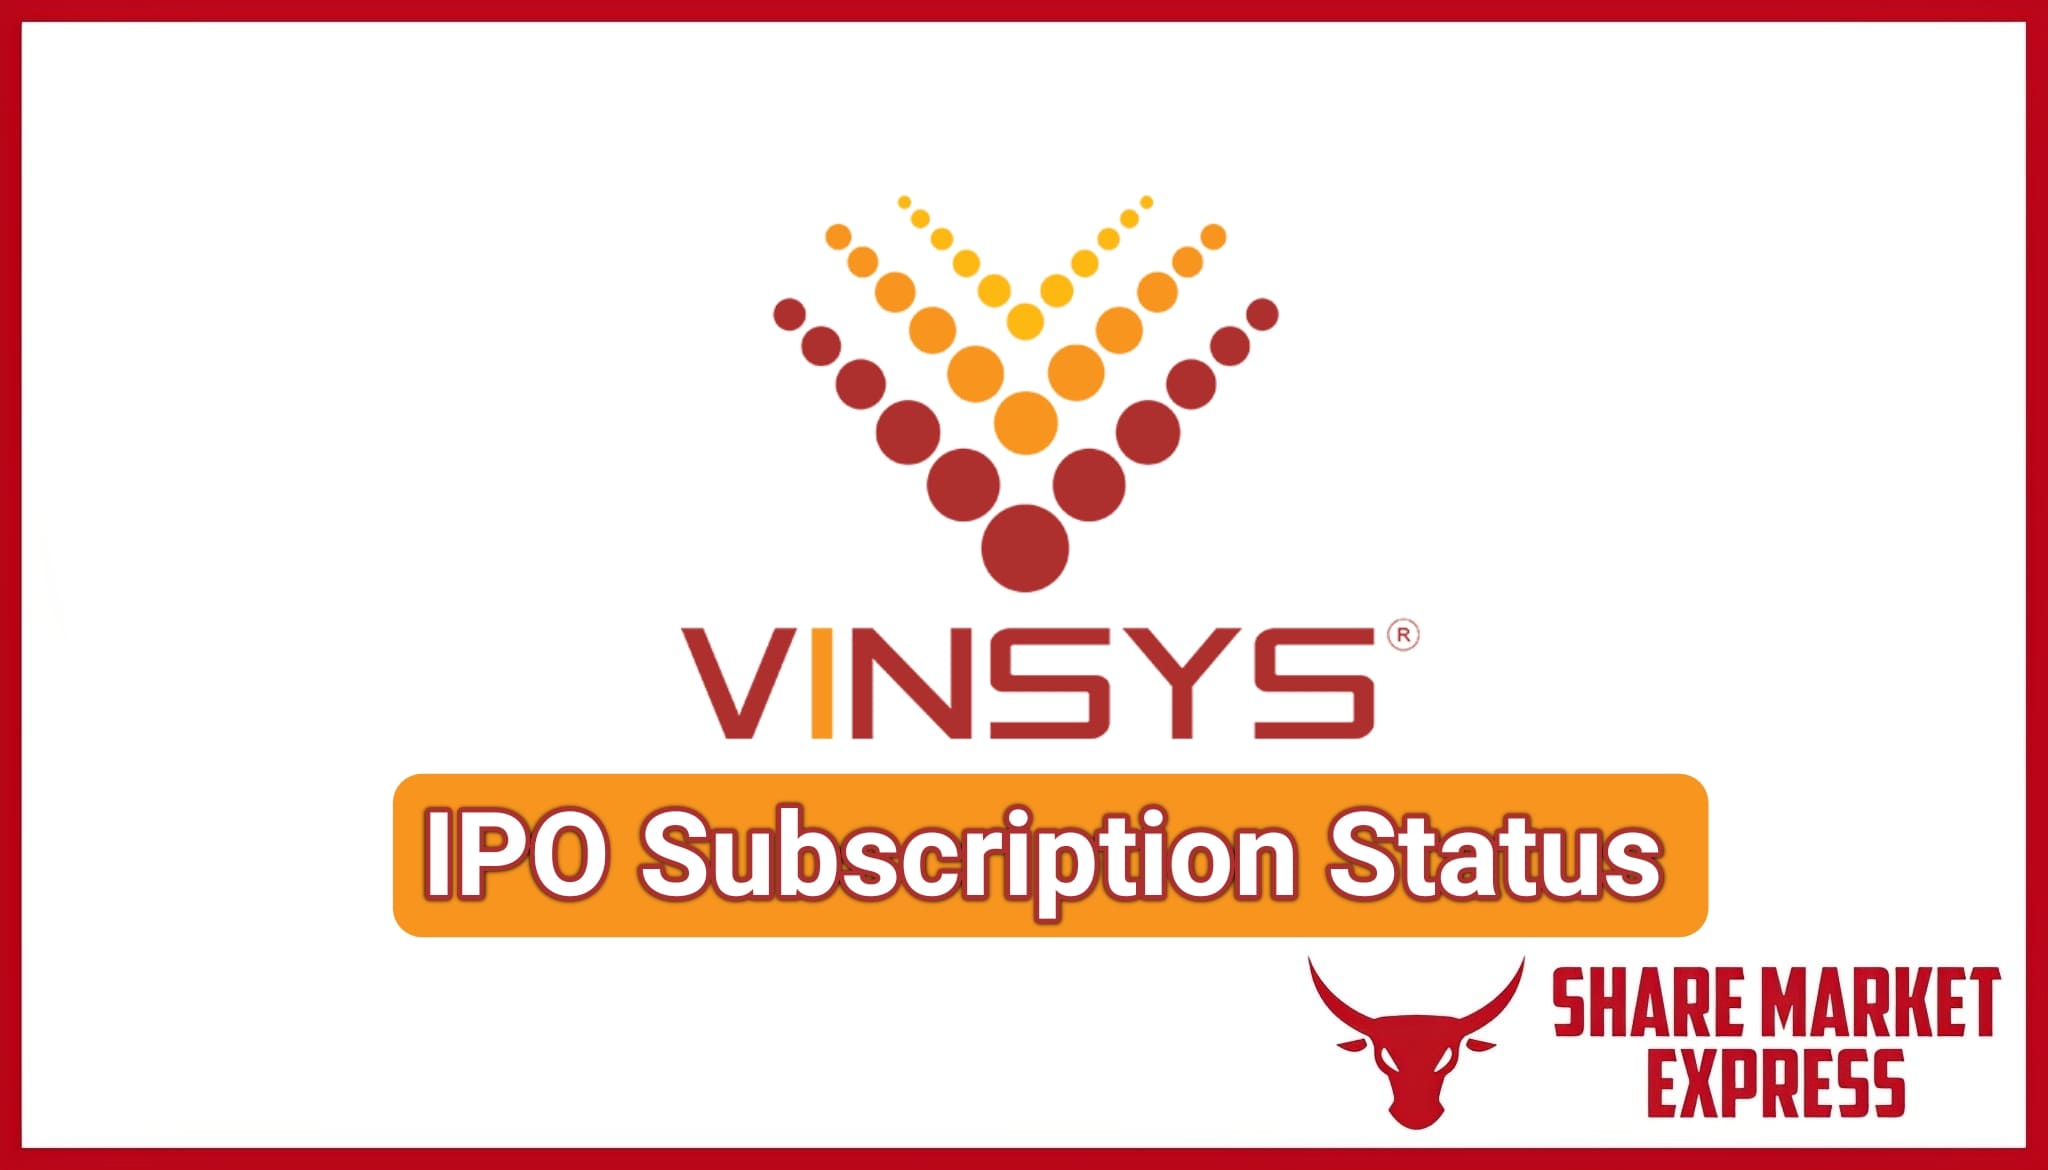 Vinsys IT Services IPO Subscription Status